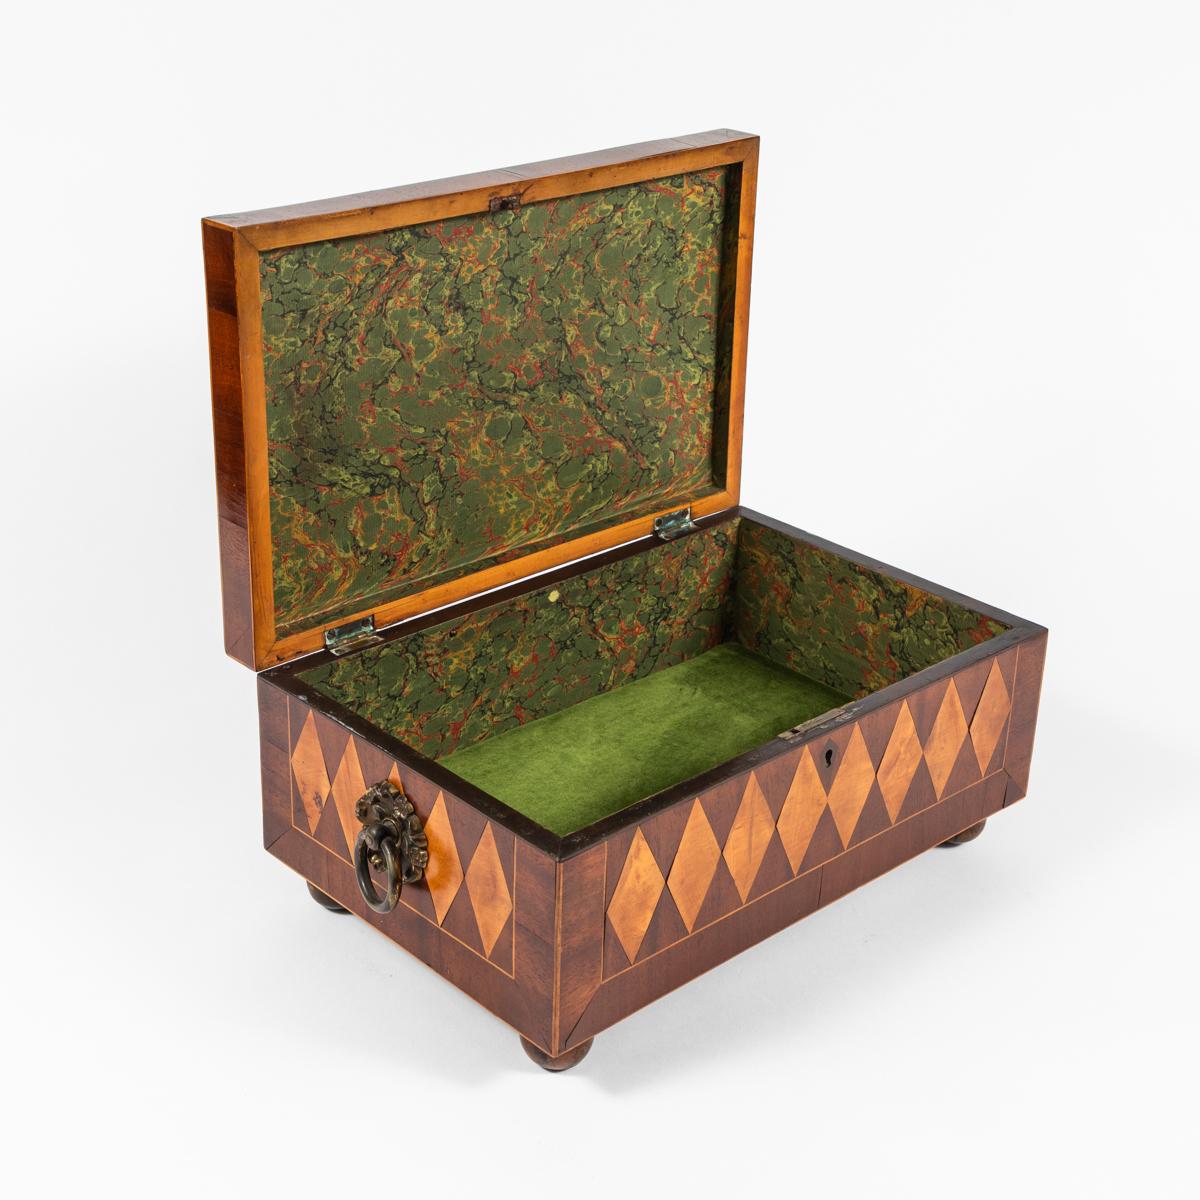 English Early 19th Century Regency Parquetry Box